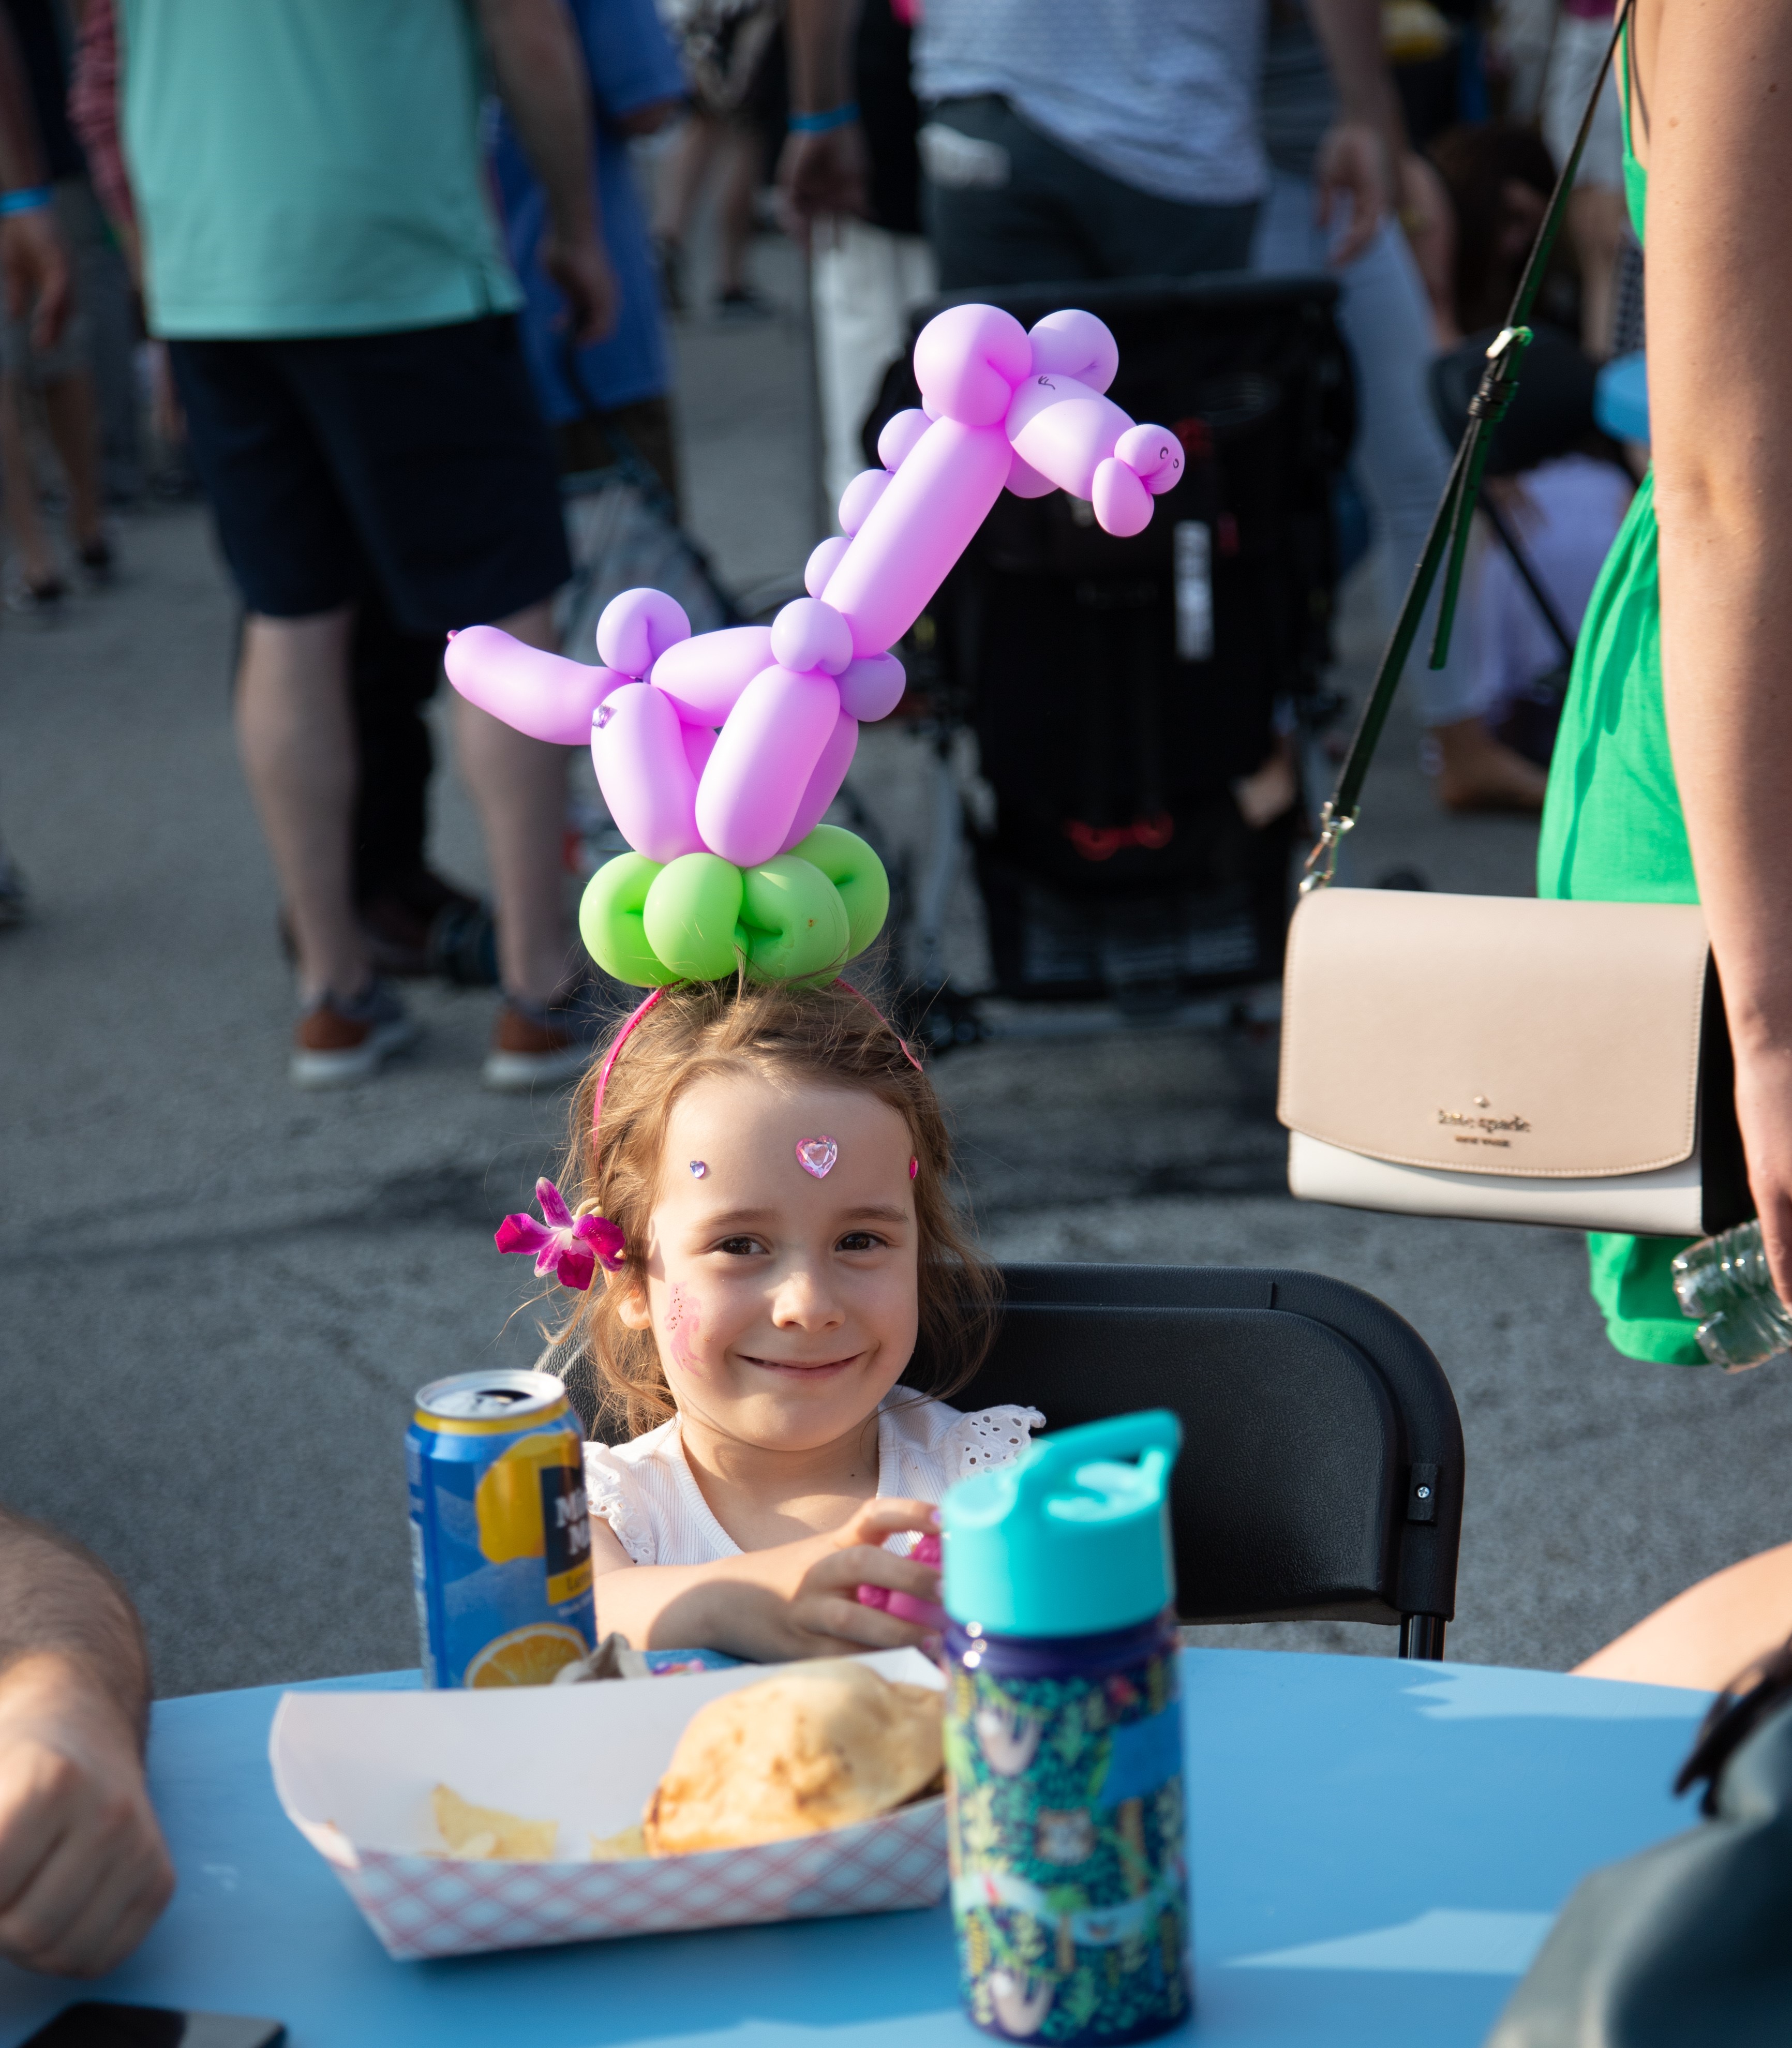 Image for Family Fun Awaits at Taste of River!